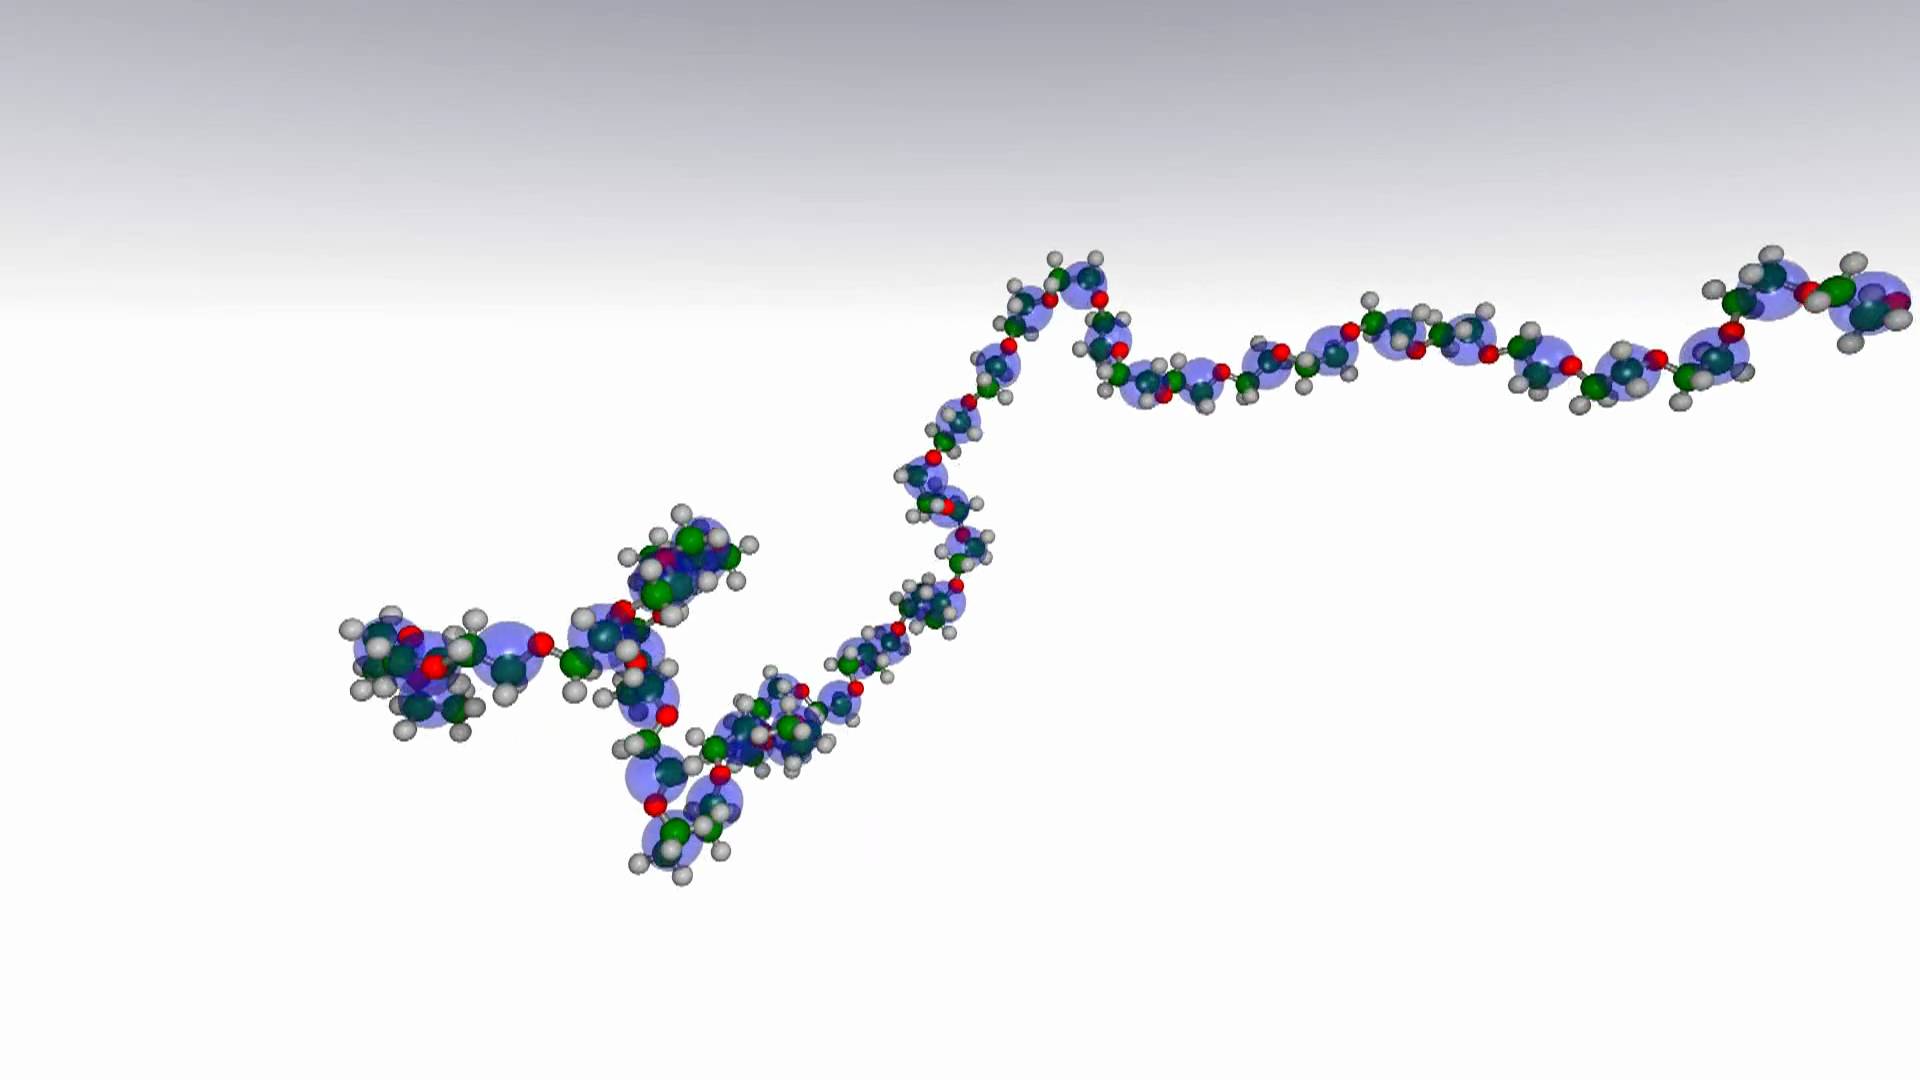 Scientists Incorporate DNA into Polymers to Create Calcium Sensors